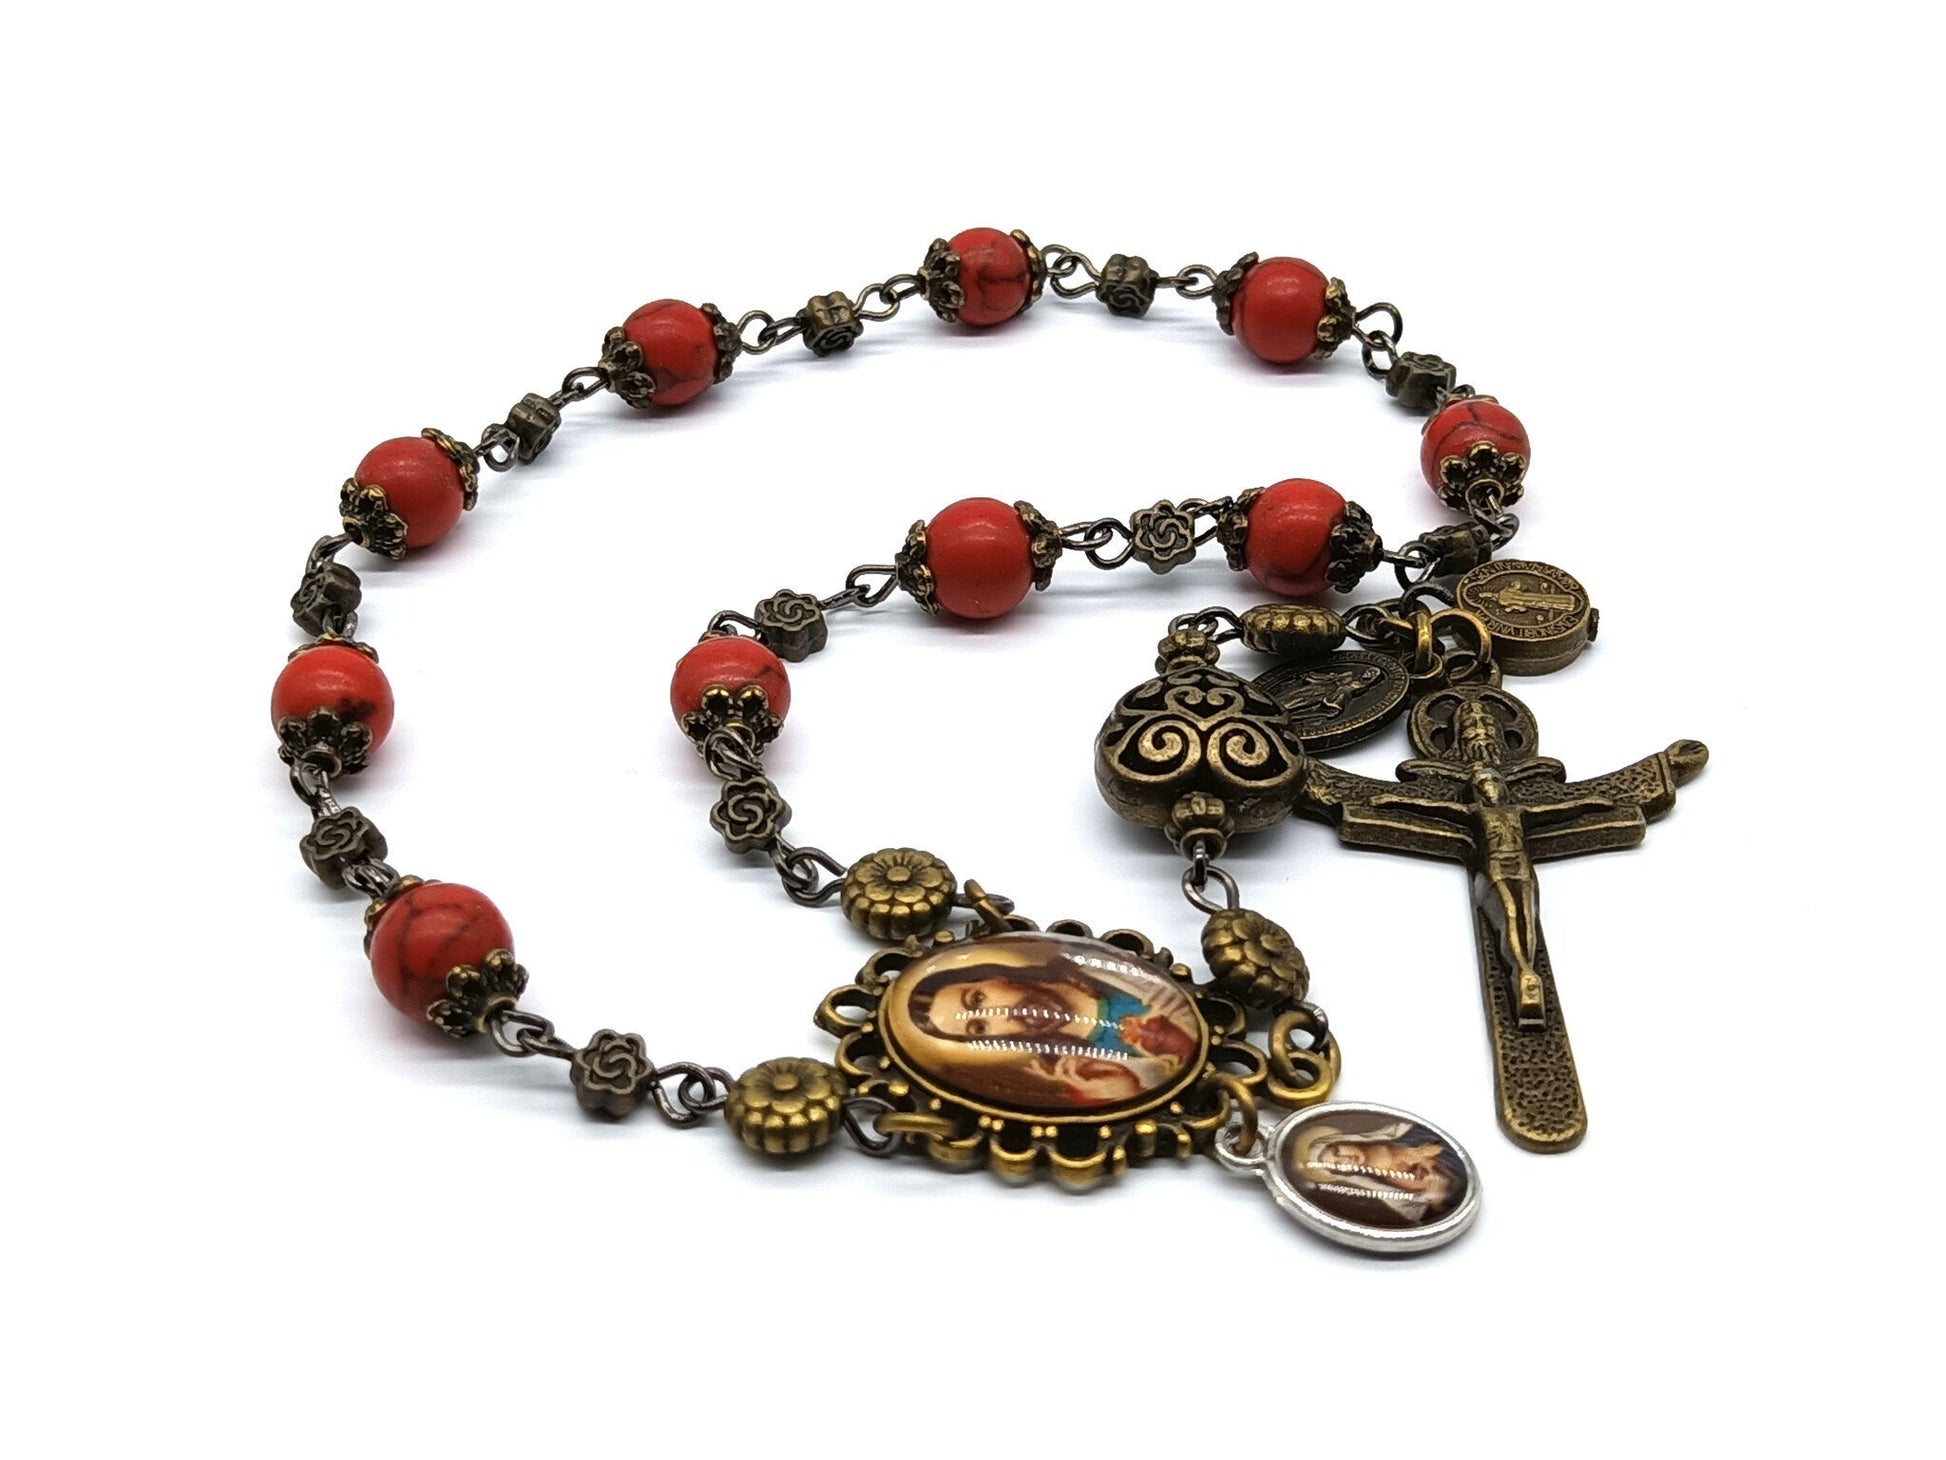 Sacred Heart unique rosary beads single decade with howlite gemstone beads, bronze Holy Trinity crucifix, bead caps and picture centre medal.